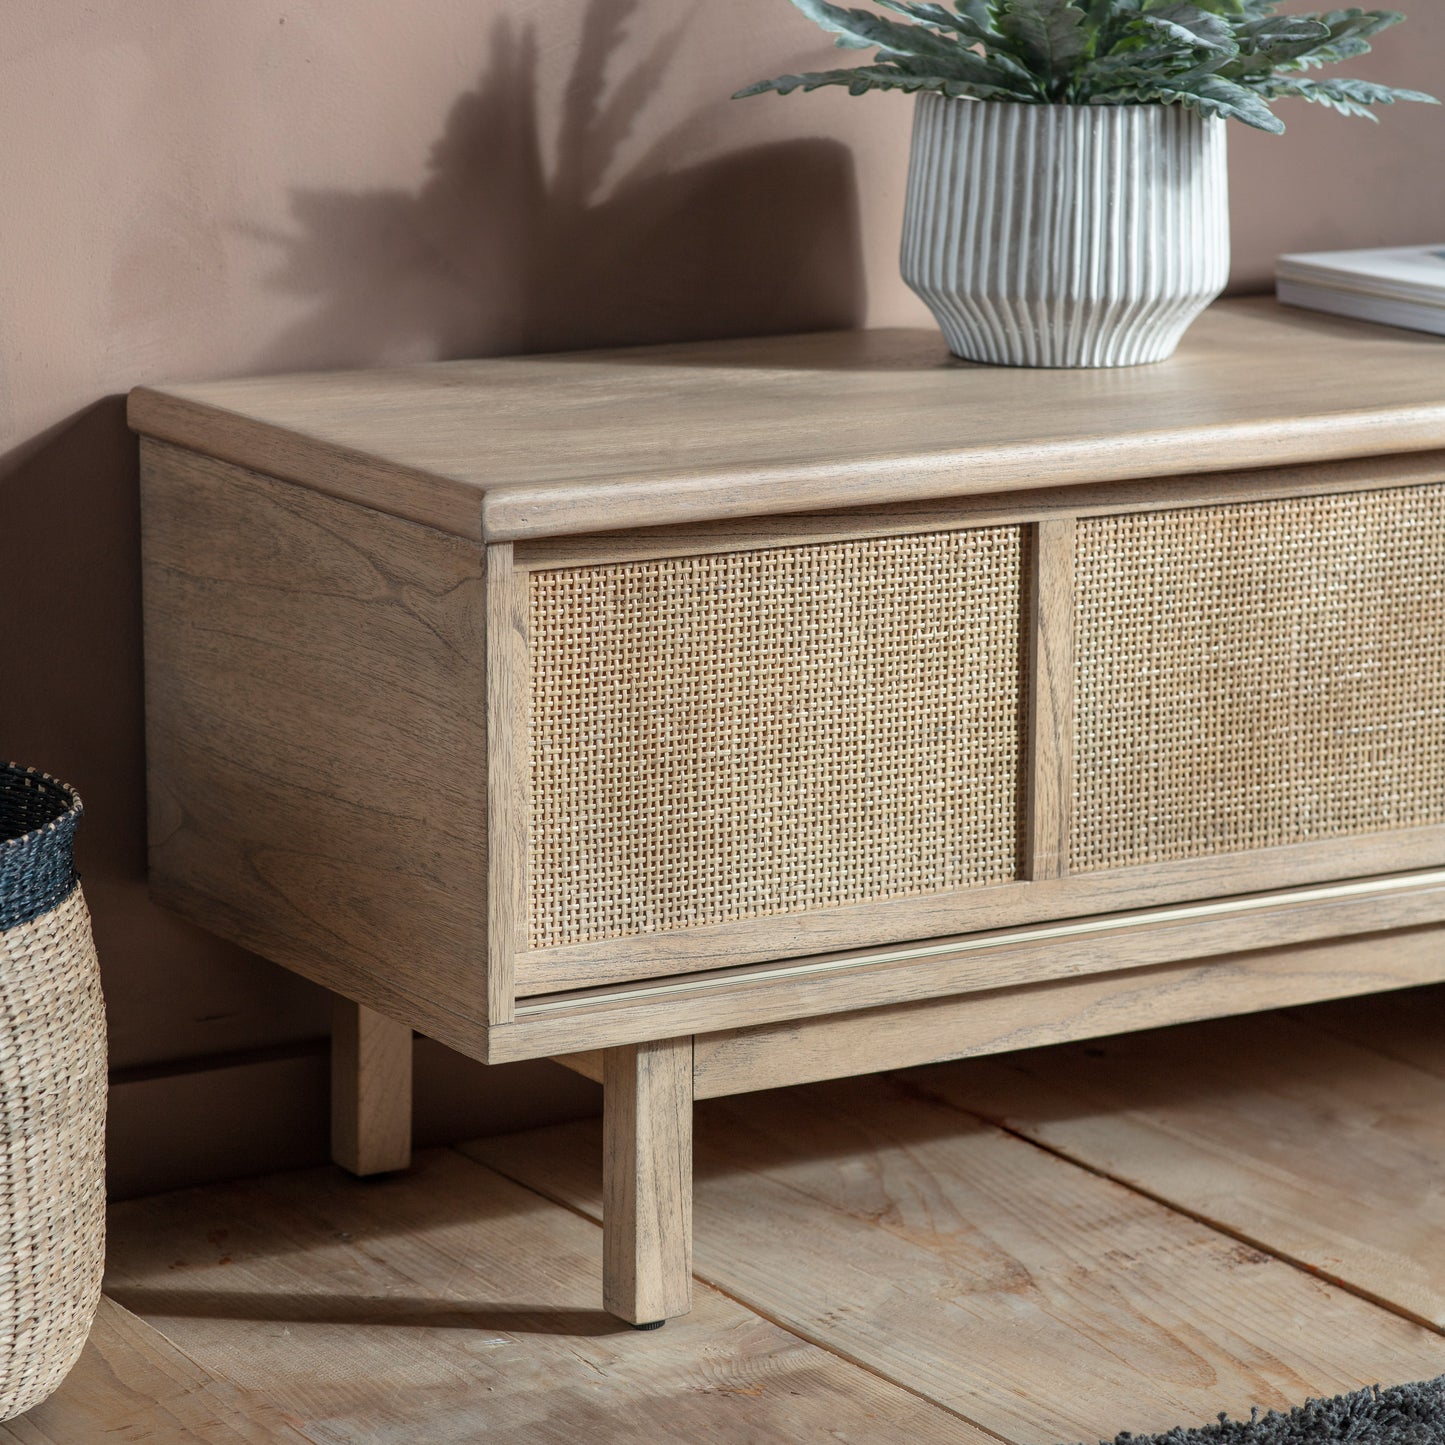 A home furniture media unit with a basket on top, available at Kikiathome.co.uk.